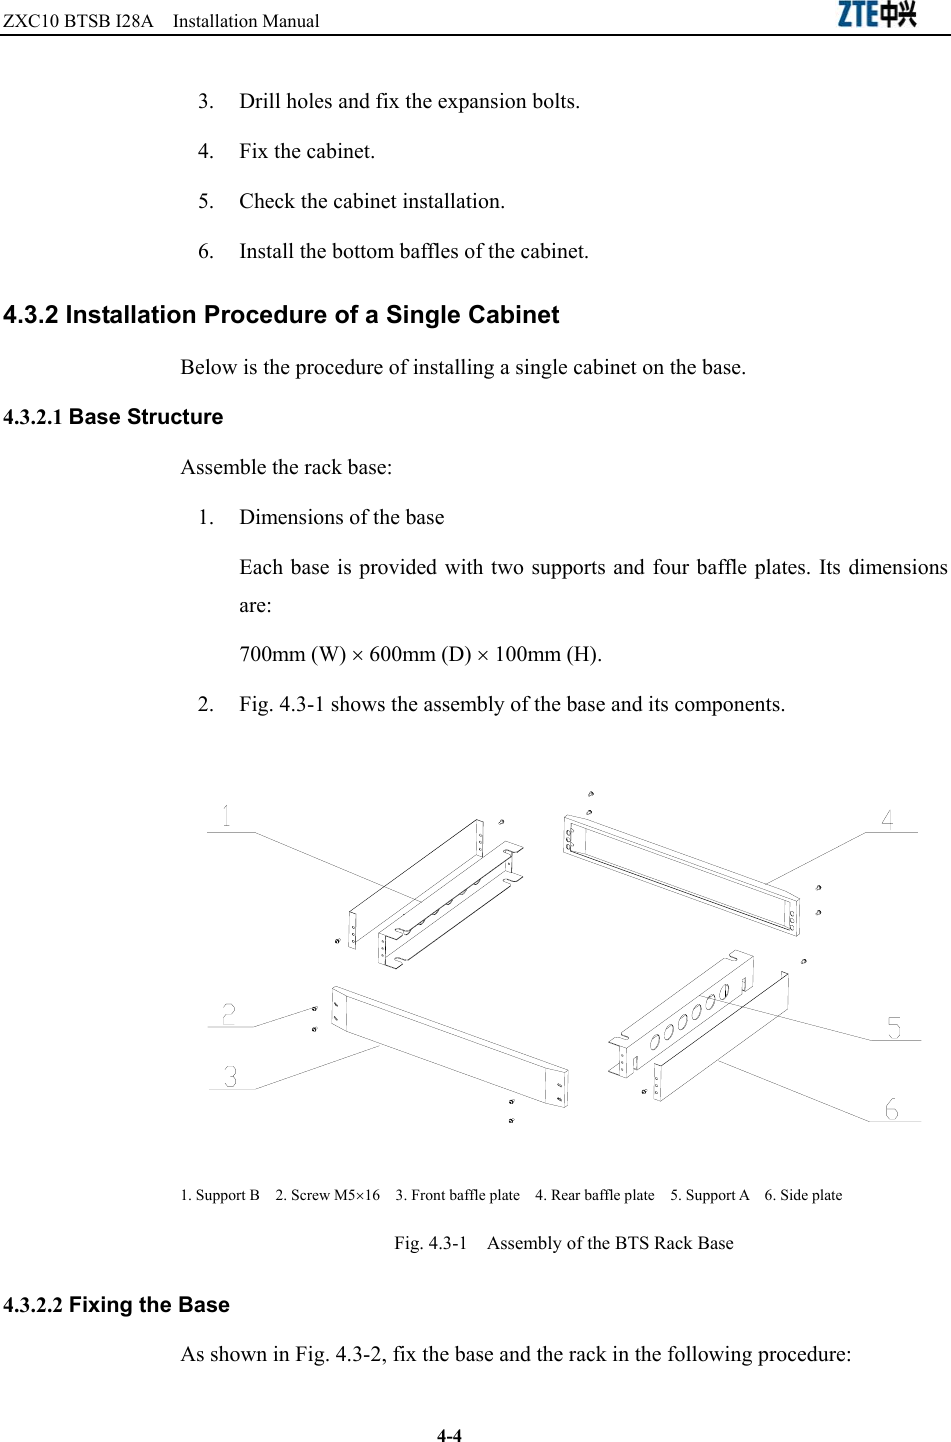 ZXC10 BTSB I28A  Installation Manual                                                          4-4 3.  Drill holes and fix the expansion bolts.   4.  Fix the cabinet.   5.  Check the cabinet installation. 6.  Install the bottom baffles of the cabinet.   4.3.2 Installation Procedure of a Single Cabinet Below is the procedure of installing a single cabinet on the base.   4.3.2.1 Base Structure Assemble the rack base:   1.  Dimensions of the base Each base is provided with two supports and four baffle plates. Its dimensions are:  700mm (W) × 600mm (D) × 100mm (H). 2.  Fig. 4.3-1 shows the assembly of the base and its components.    1. Support B    2. Screw M5×16    3. Front baffle plate    4. Rear baffle plate    5. Support A    6. Side plate Fig. 4.3-1    Assembly of the BTS Rack Base 4.3.2.2 Fixing the Base As shown in Fig. 4.3-2, fix the base and the rack in the following procedure:   